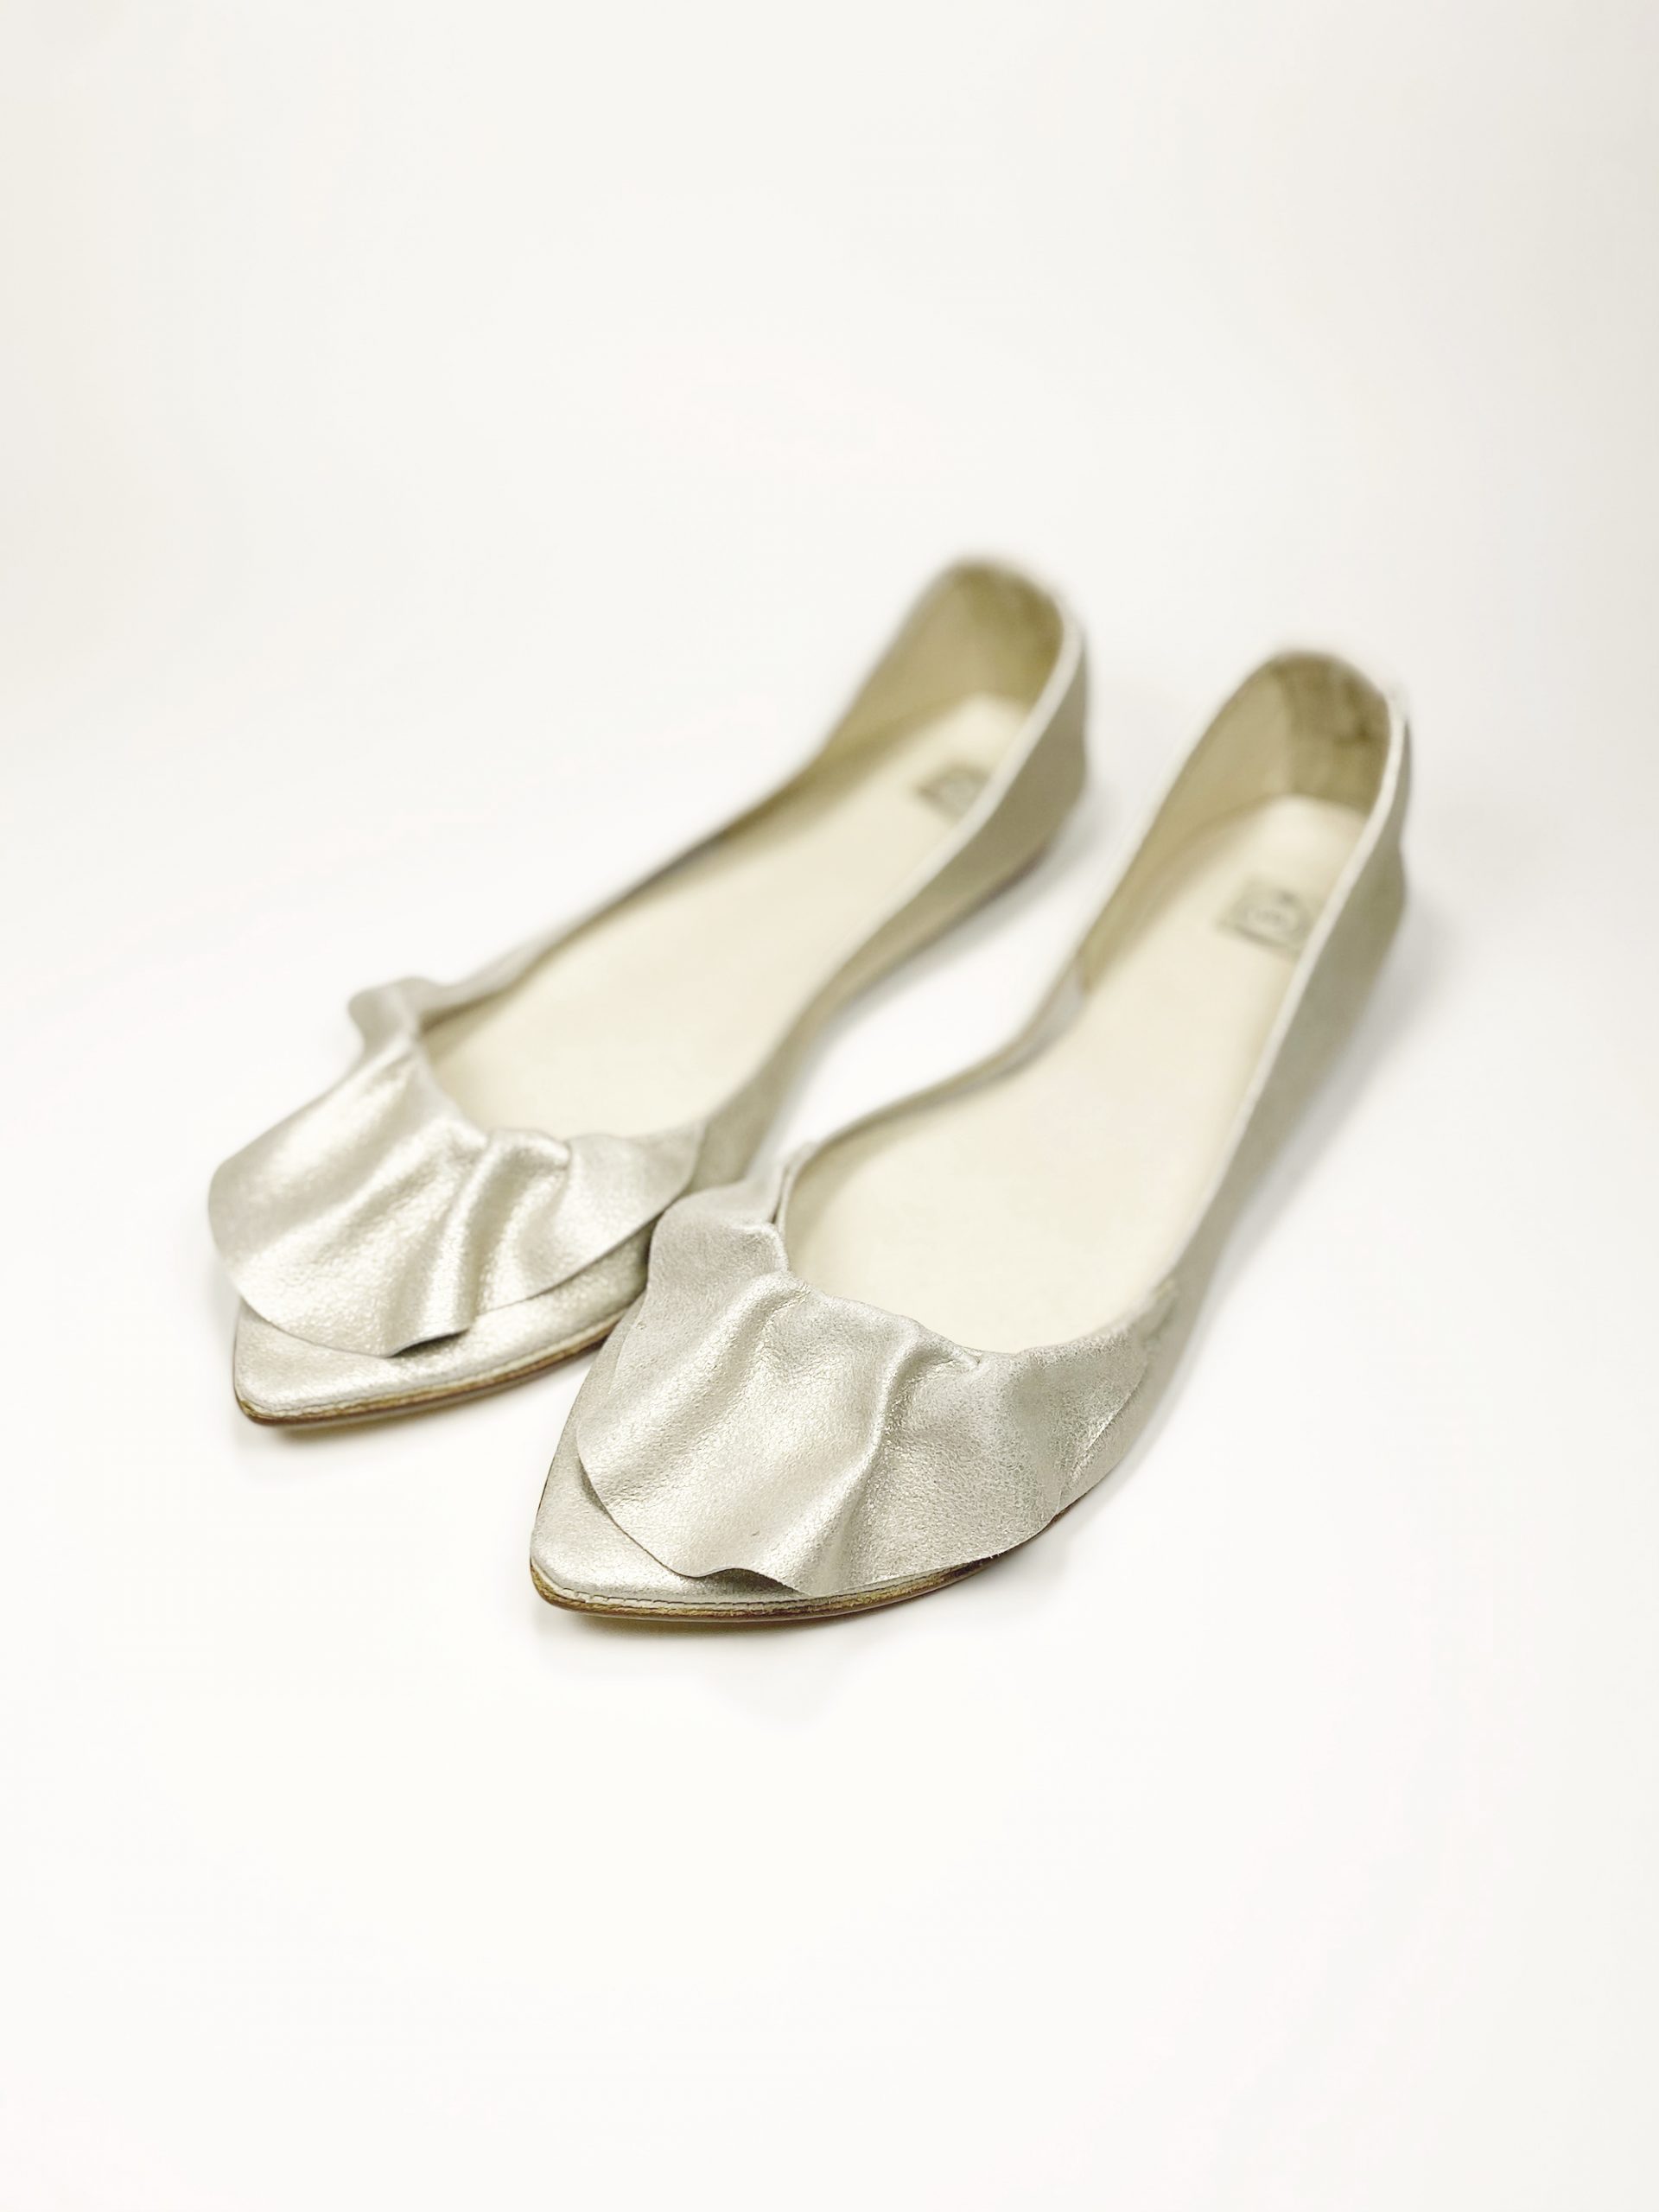 Ruffled pointy flats in white gold — Ele Handmade Shoes